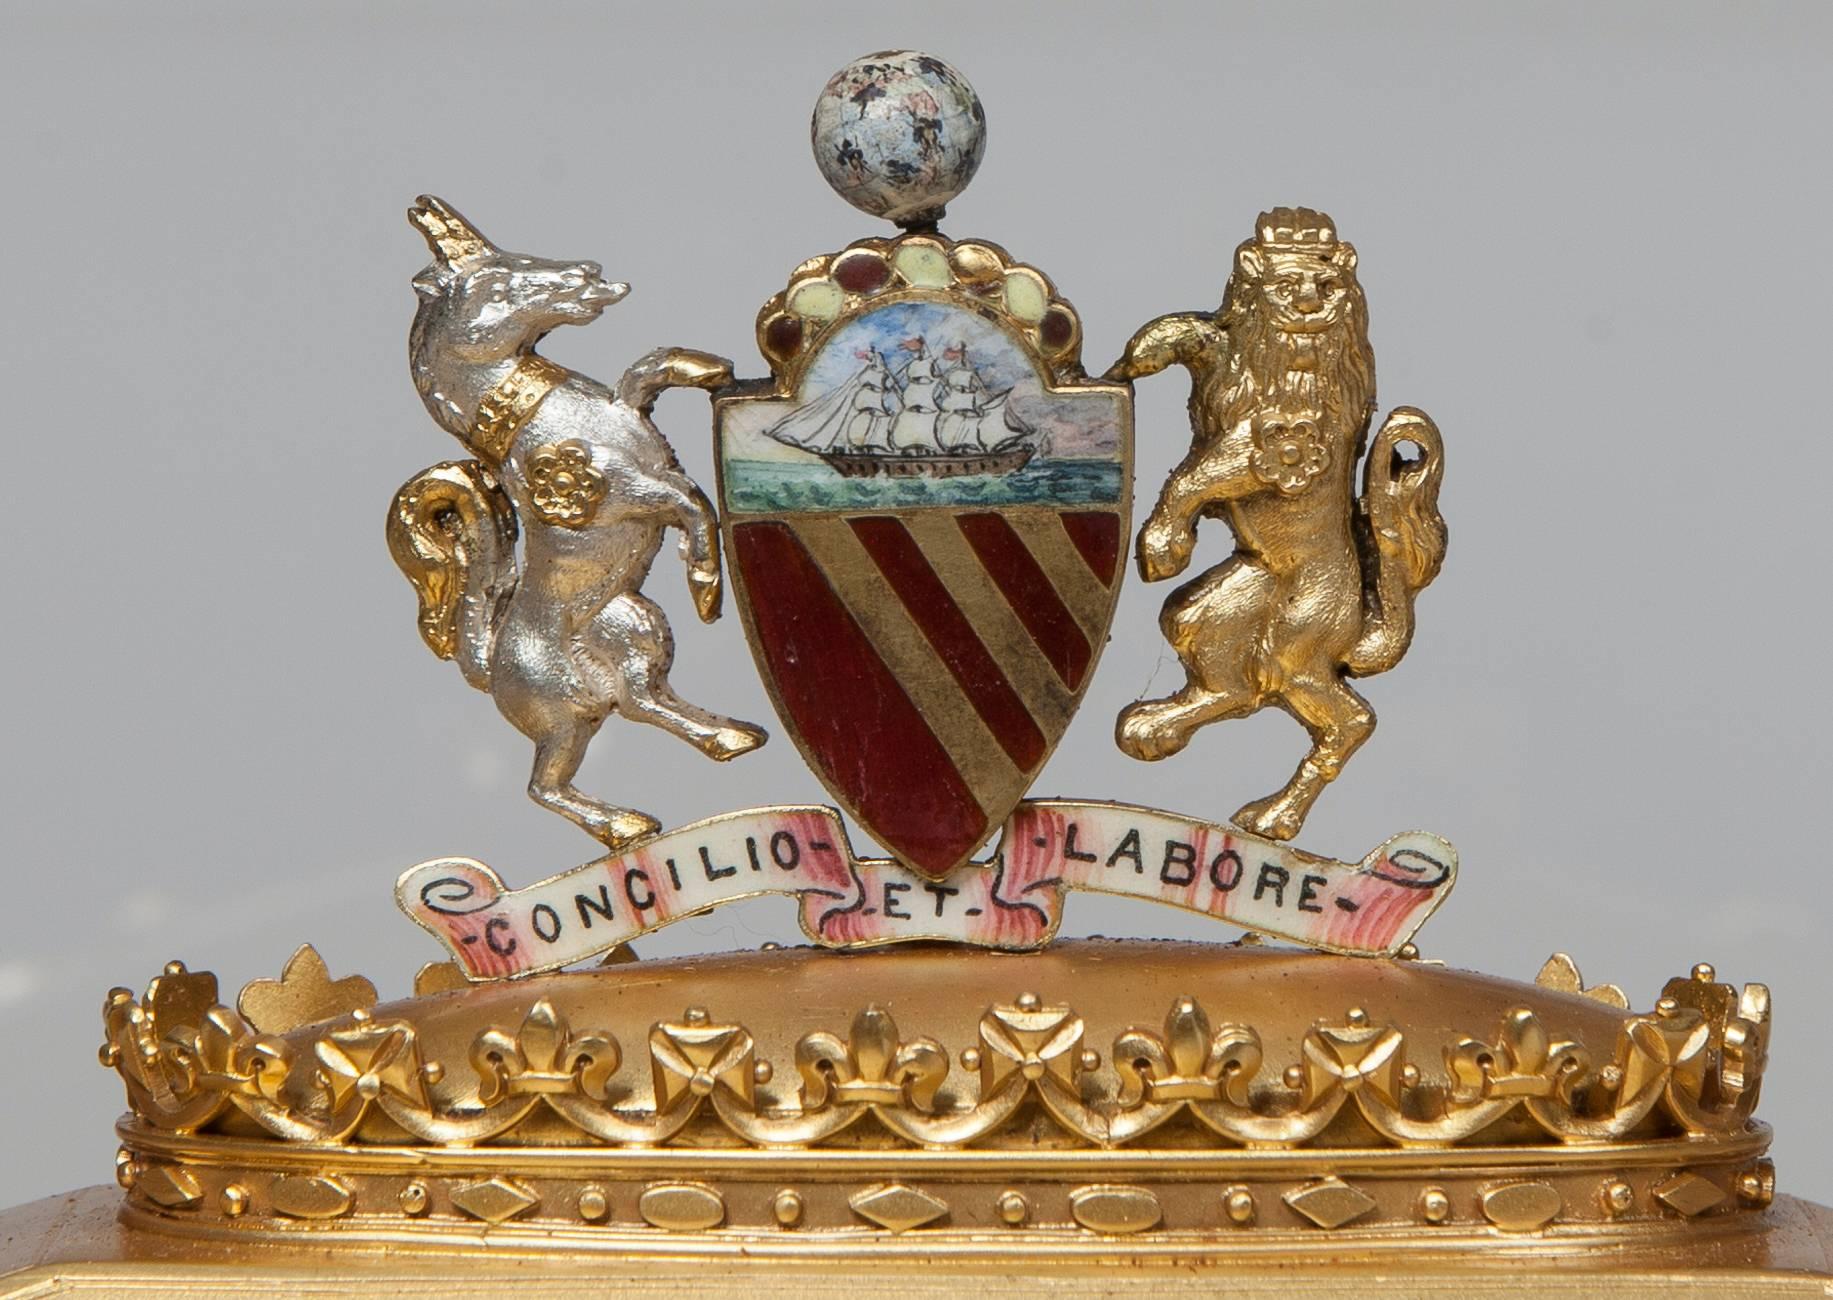 
An Elkington & Company Silver Gilt Presentation Casket
Hall Marked for Birmingham, 1891 and the maker; the casket, in the Victorian Gothic manner, with cluster columns at the angles, with fascias of lancet arches dressed with trefoils, and has a